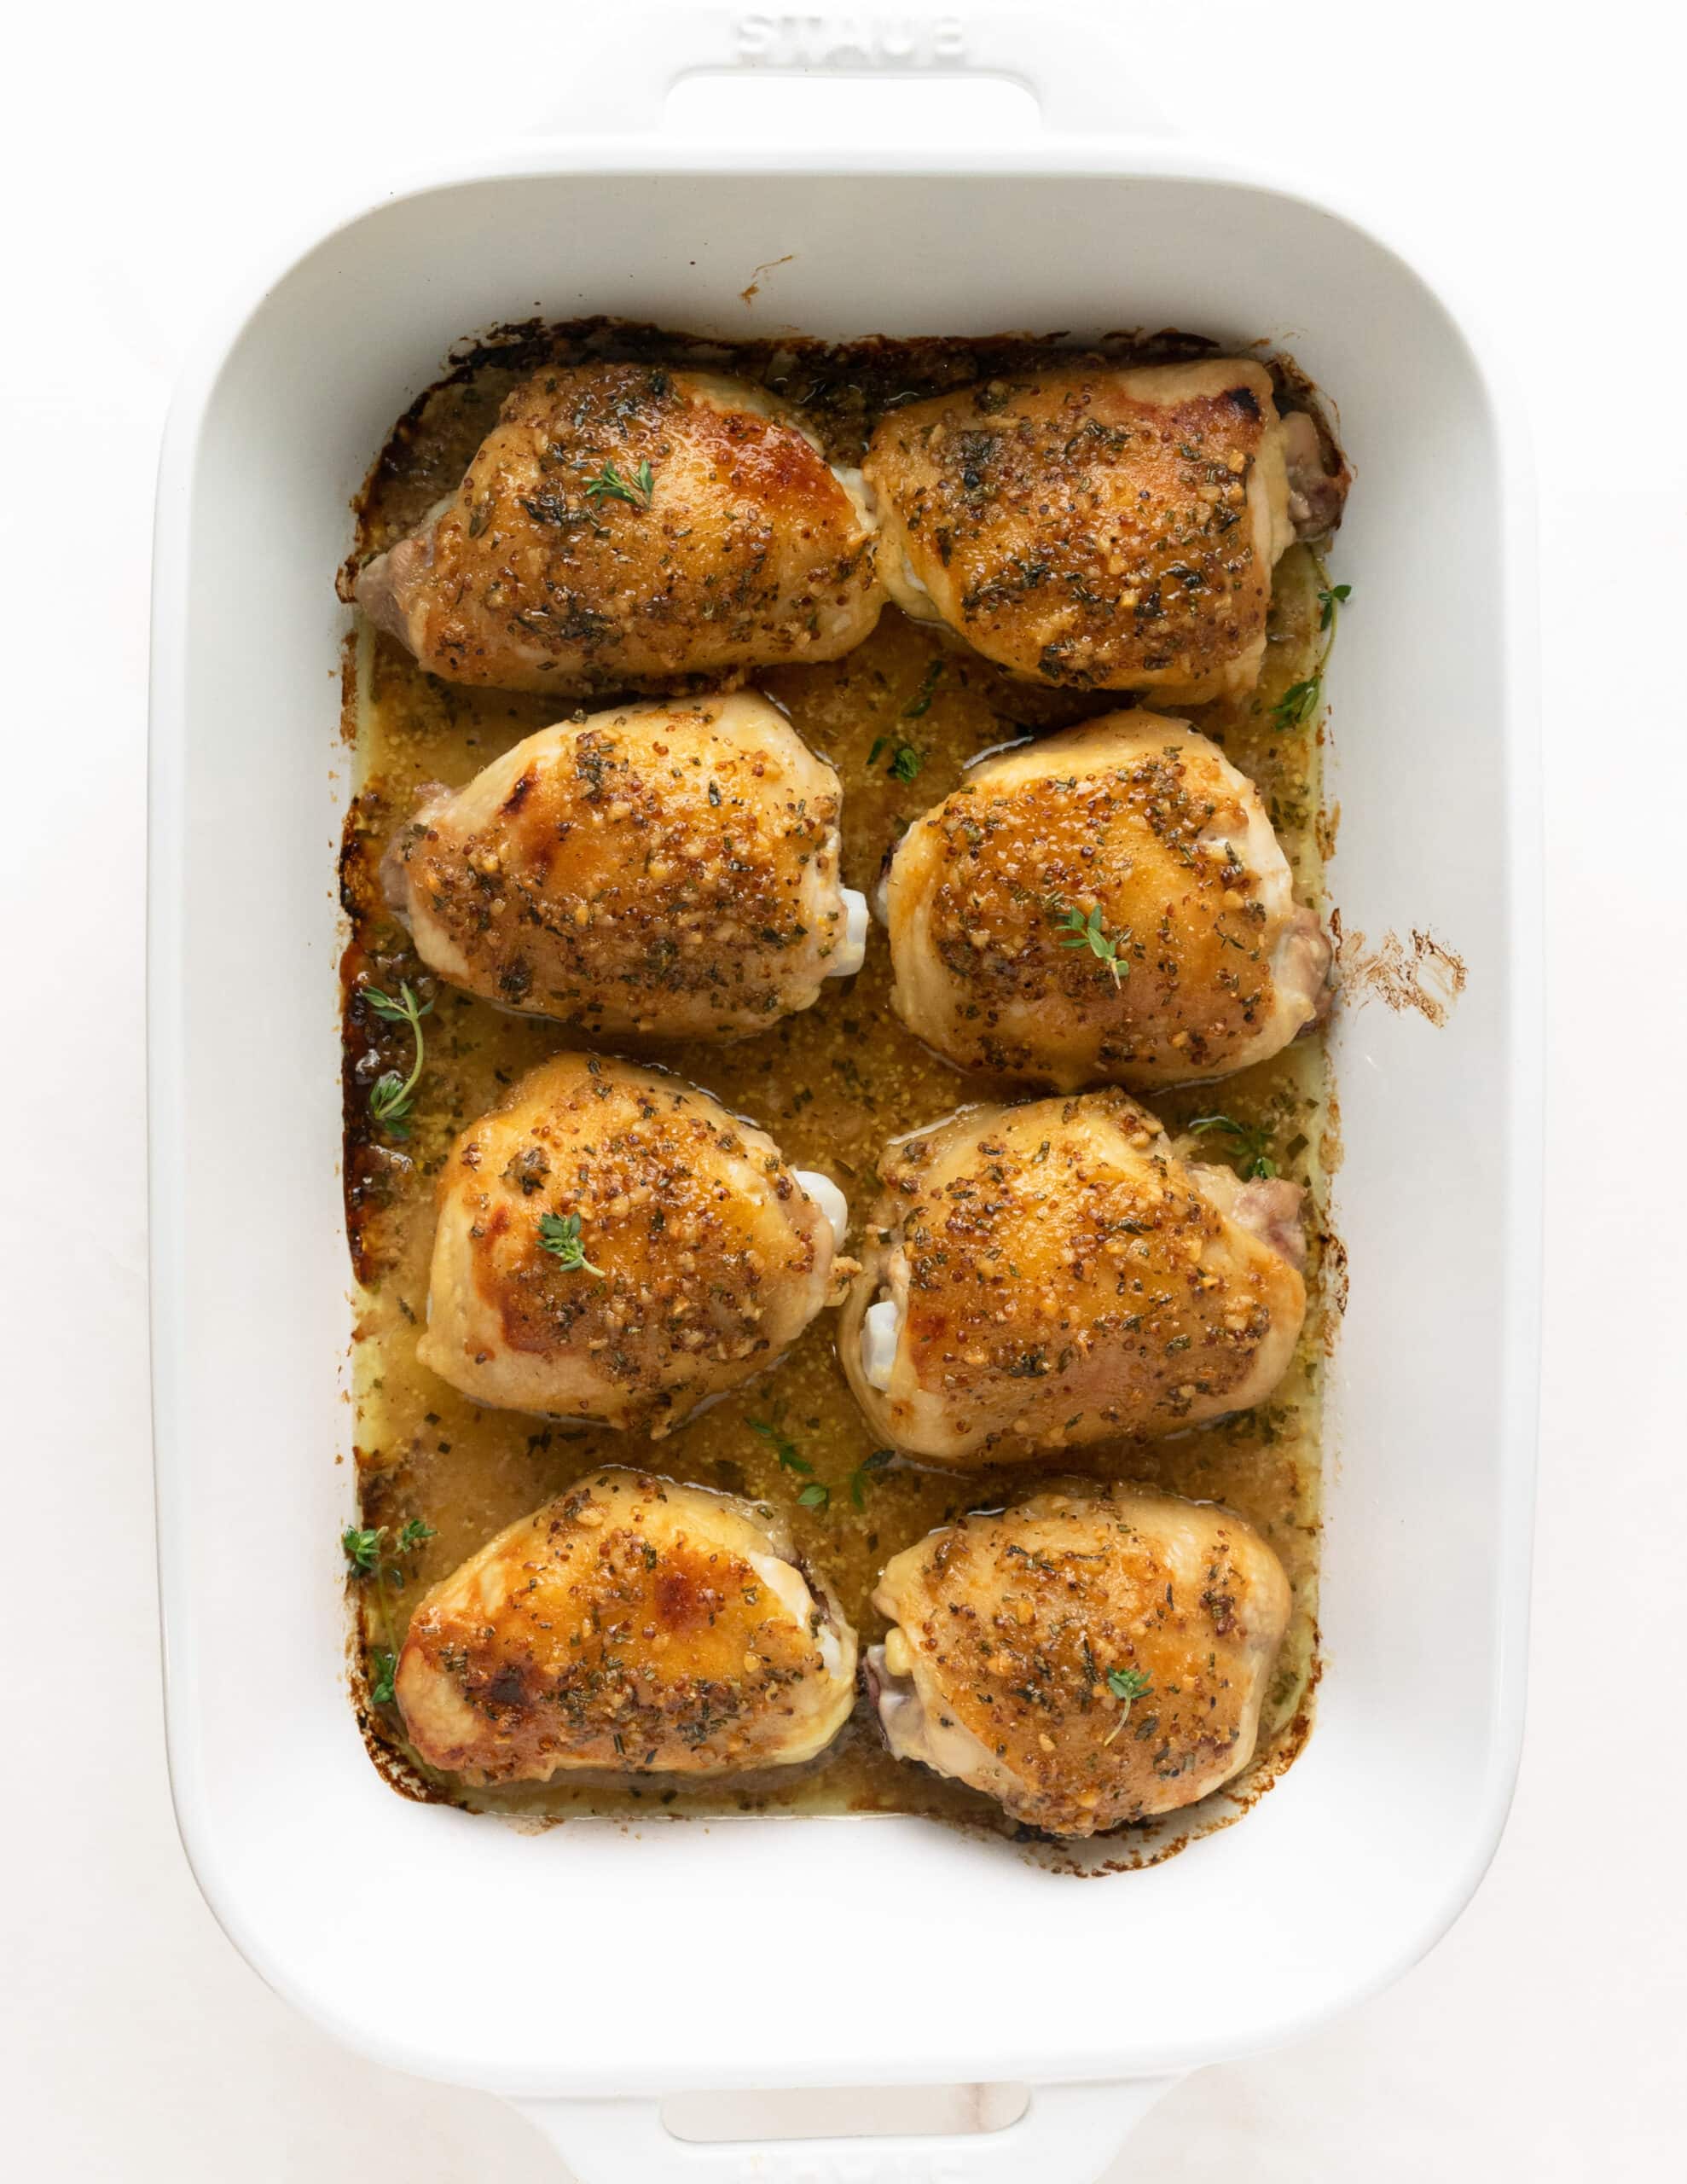 A large white ceramic baking dish of 8 fully cooked, bone-in chicken thighs with a honey dijon mustard sauce.